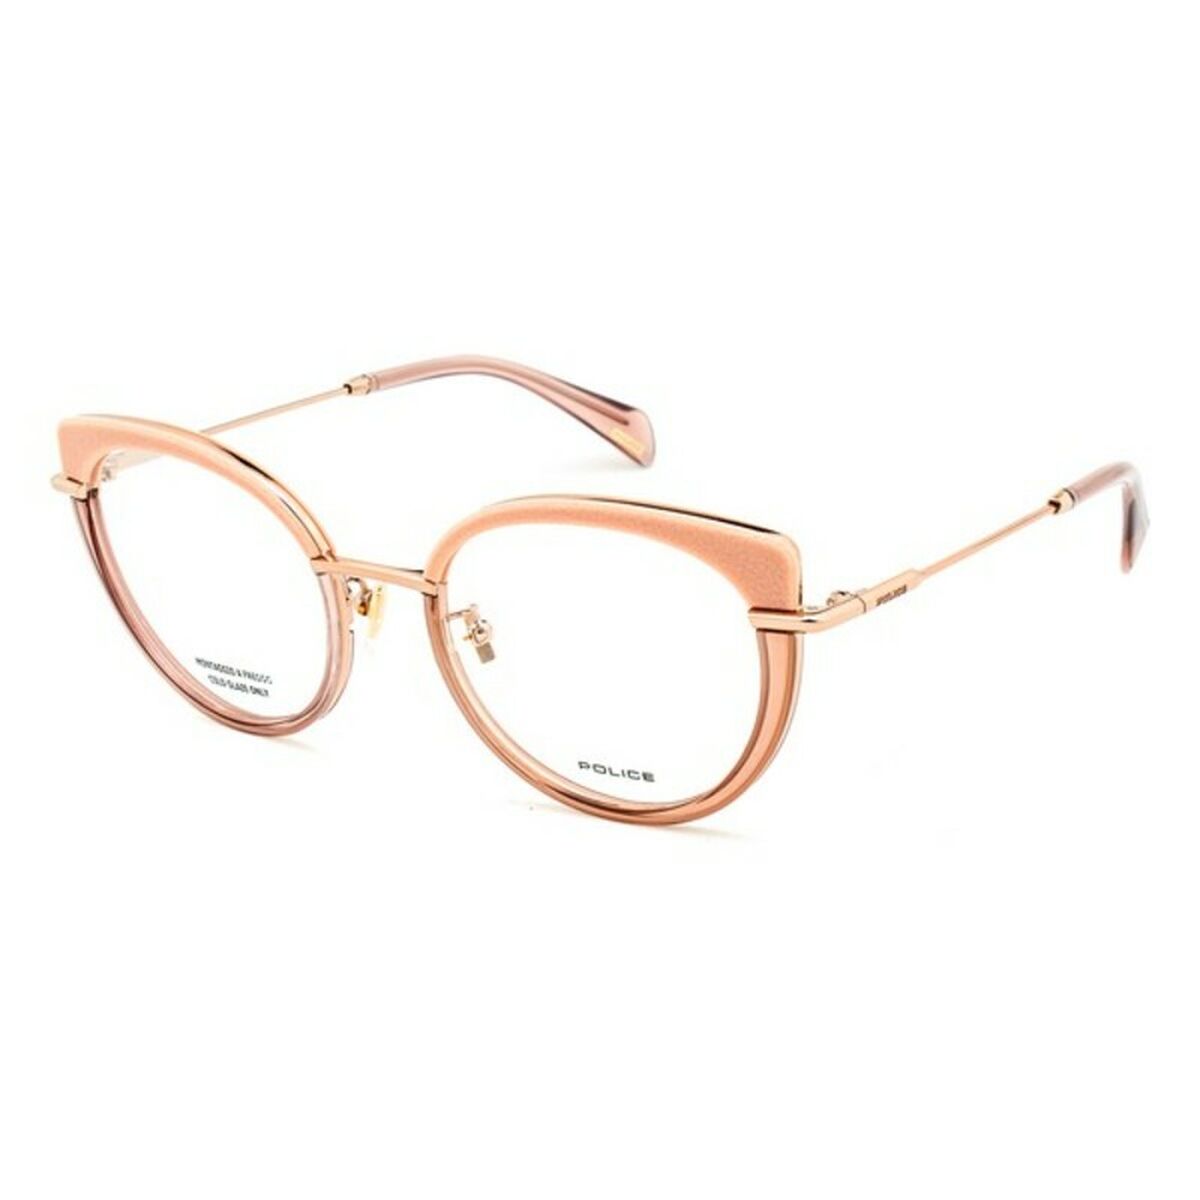 Ladies'Spectacle frame Police VPLA050A39 Red Pink (ø 53 mm)